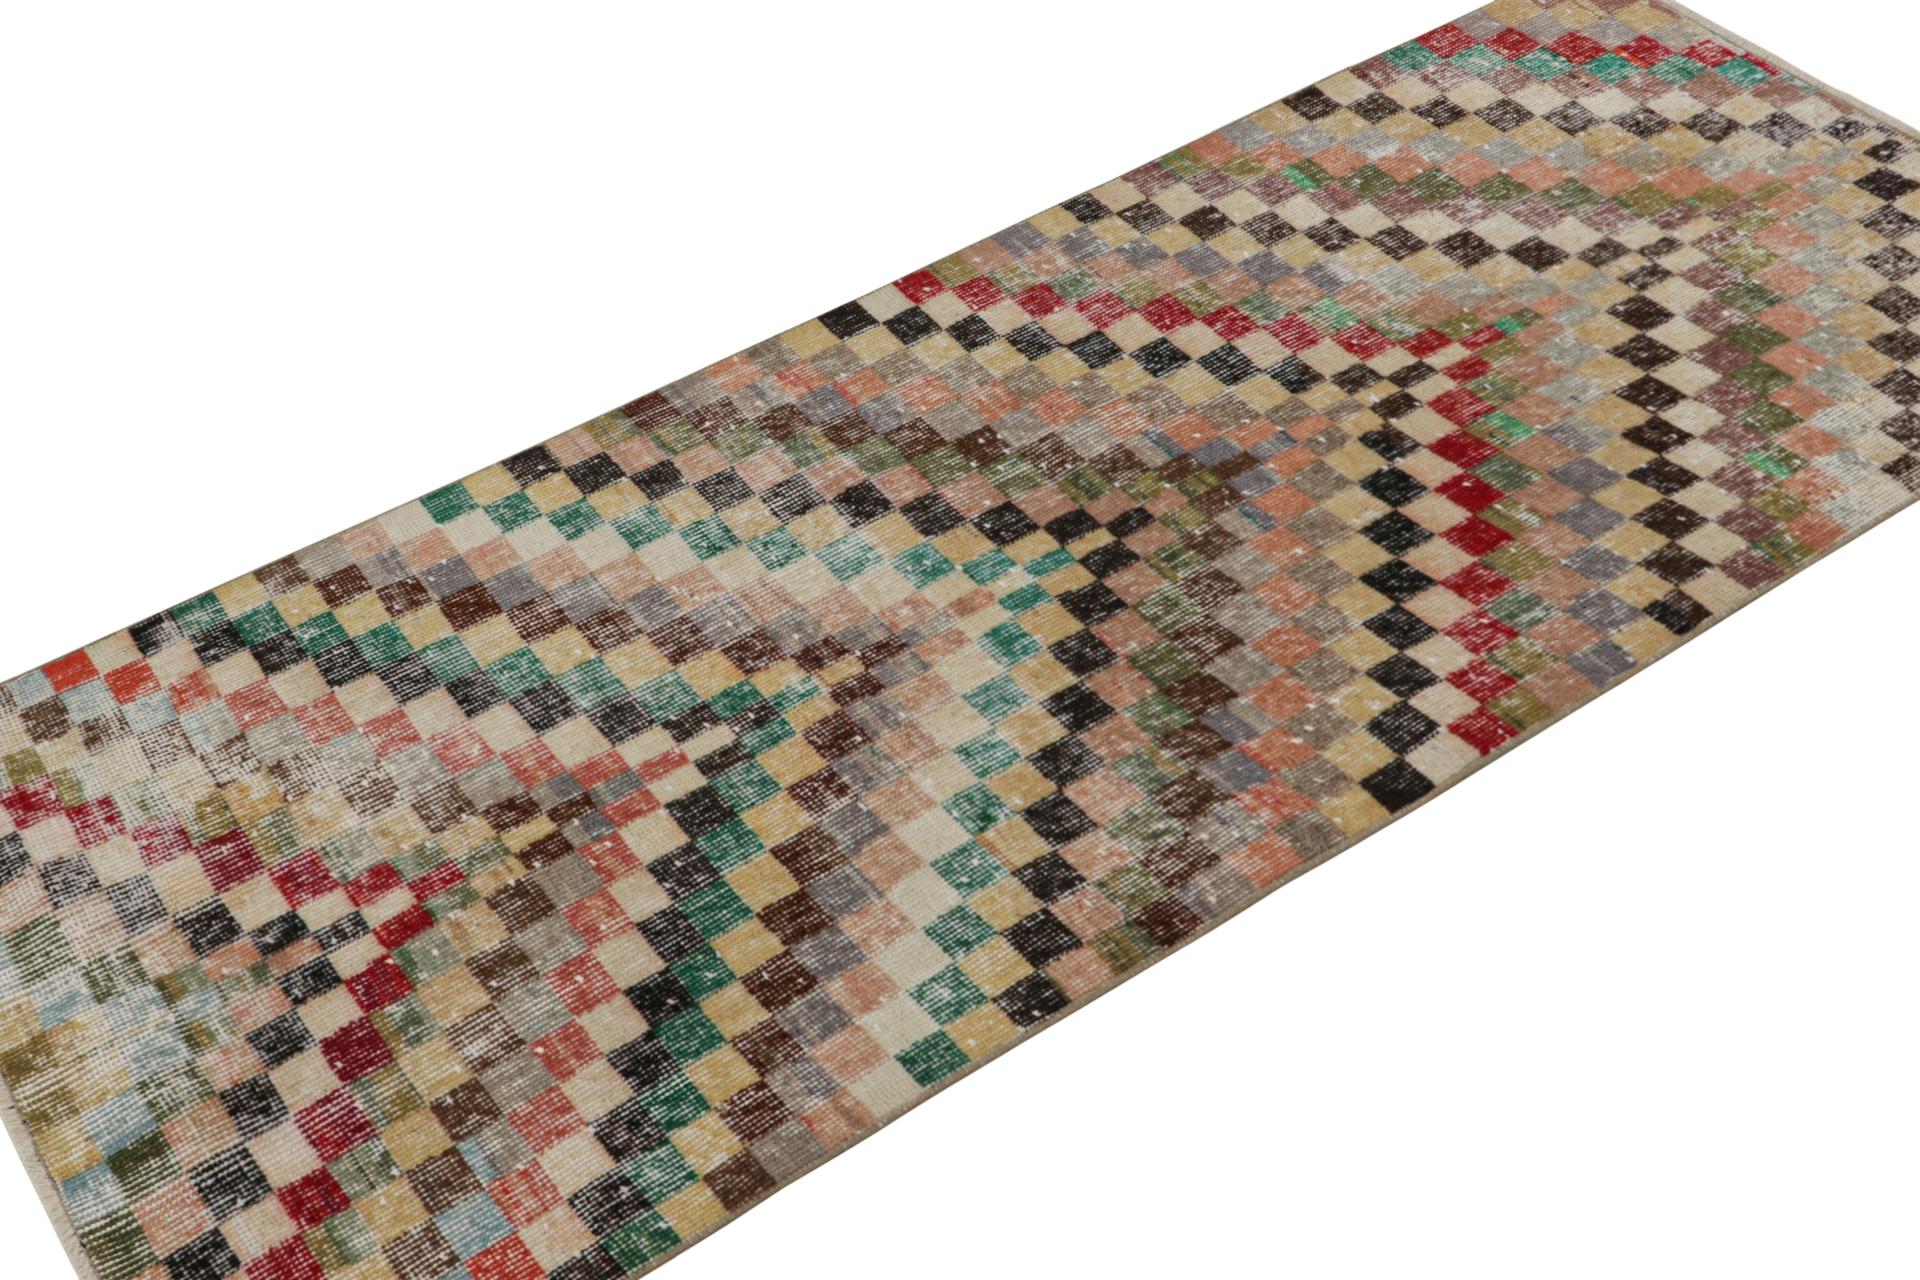 This vintage 2x6 Art Deco runner rug, hand-knotted in wool, circa 1960-1970, features a mid-century take on Art Deco and cubist sensibilities, with Zeki Müren’s sought-after sense of playful color and movement therein.  

On the Design: